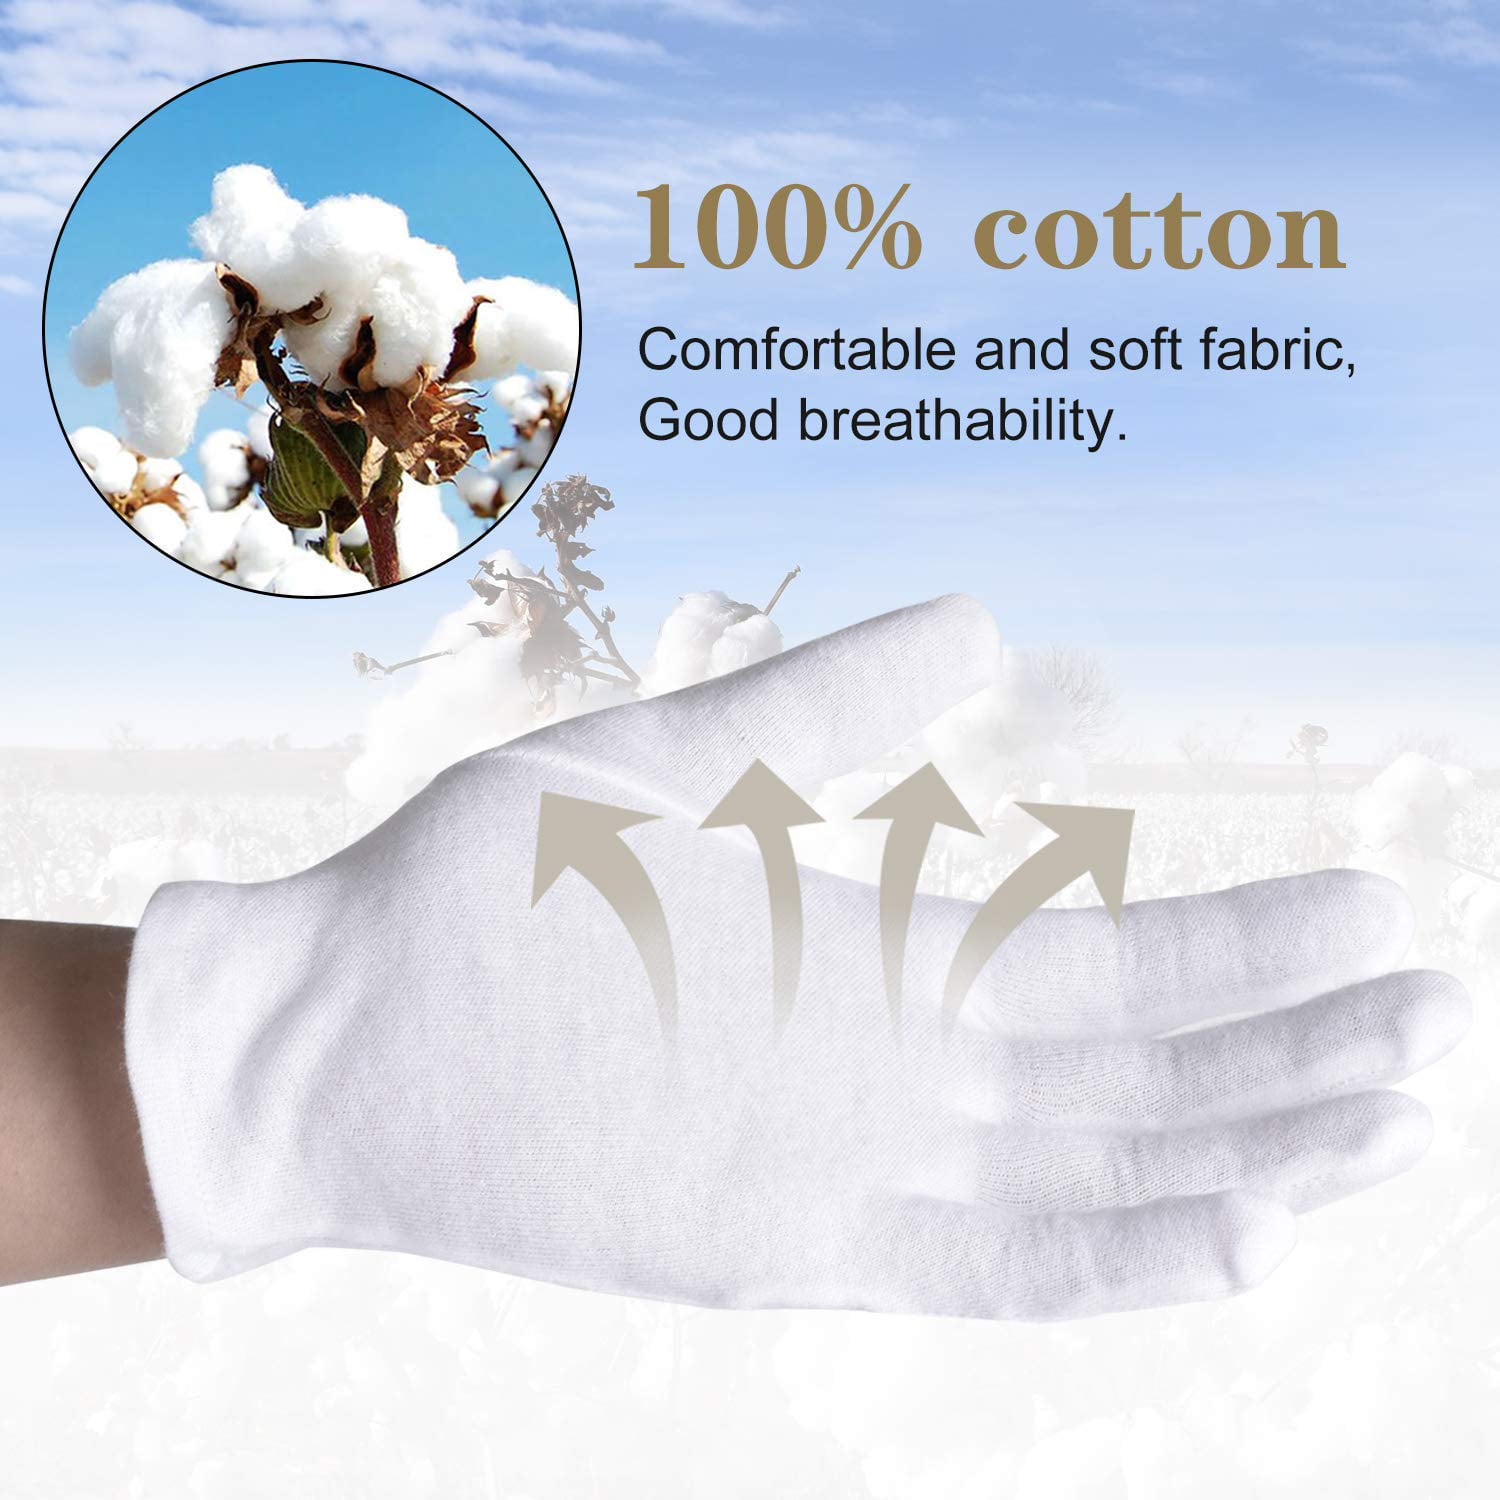 100% Cotton Gloves, 6 Pairs White Cotton Gloves for Women Dry Hands Eczema  Serving - Archival Coin Jewelry Inspection Gloves (6 Pairs) 